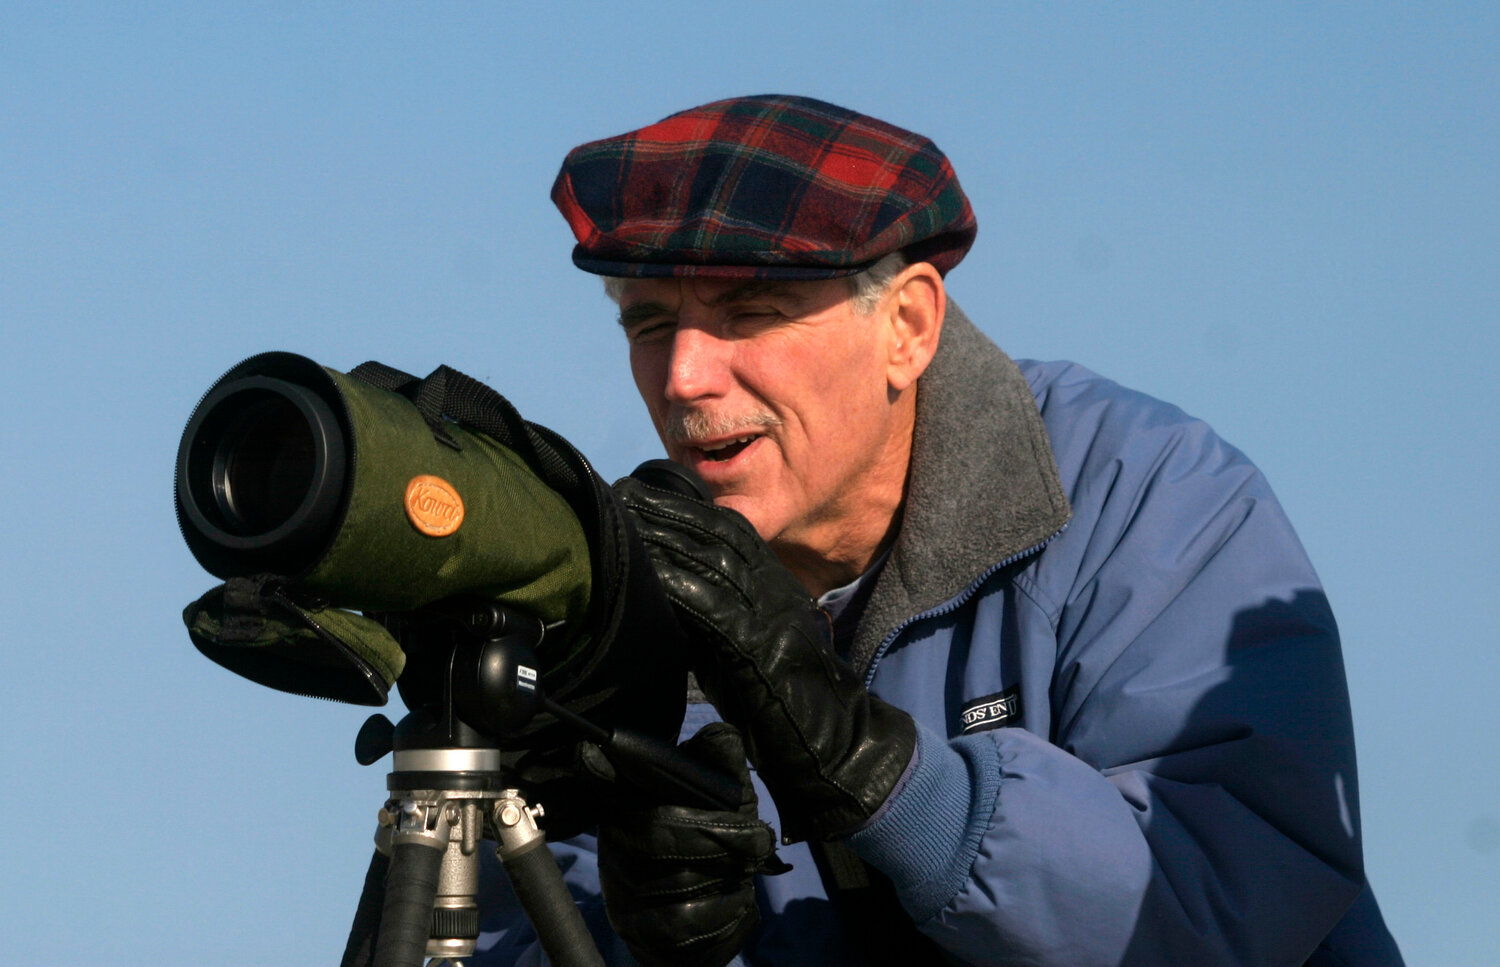 Nantucket's Christmas Bird Count will be held on Dec. 31 this year.